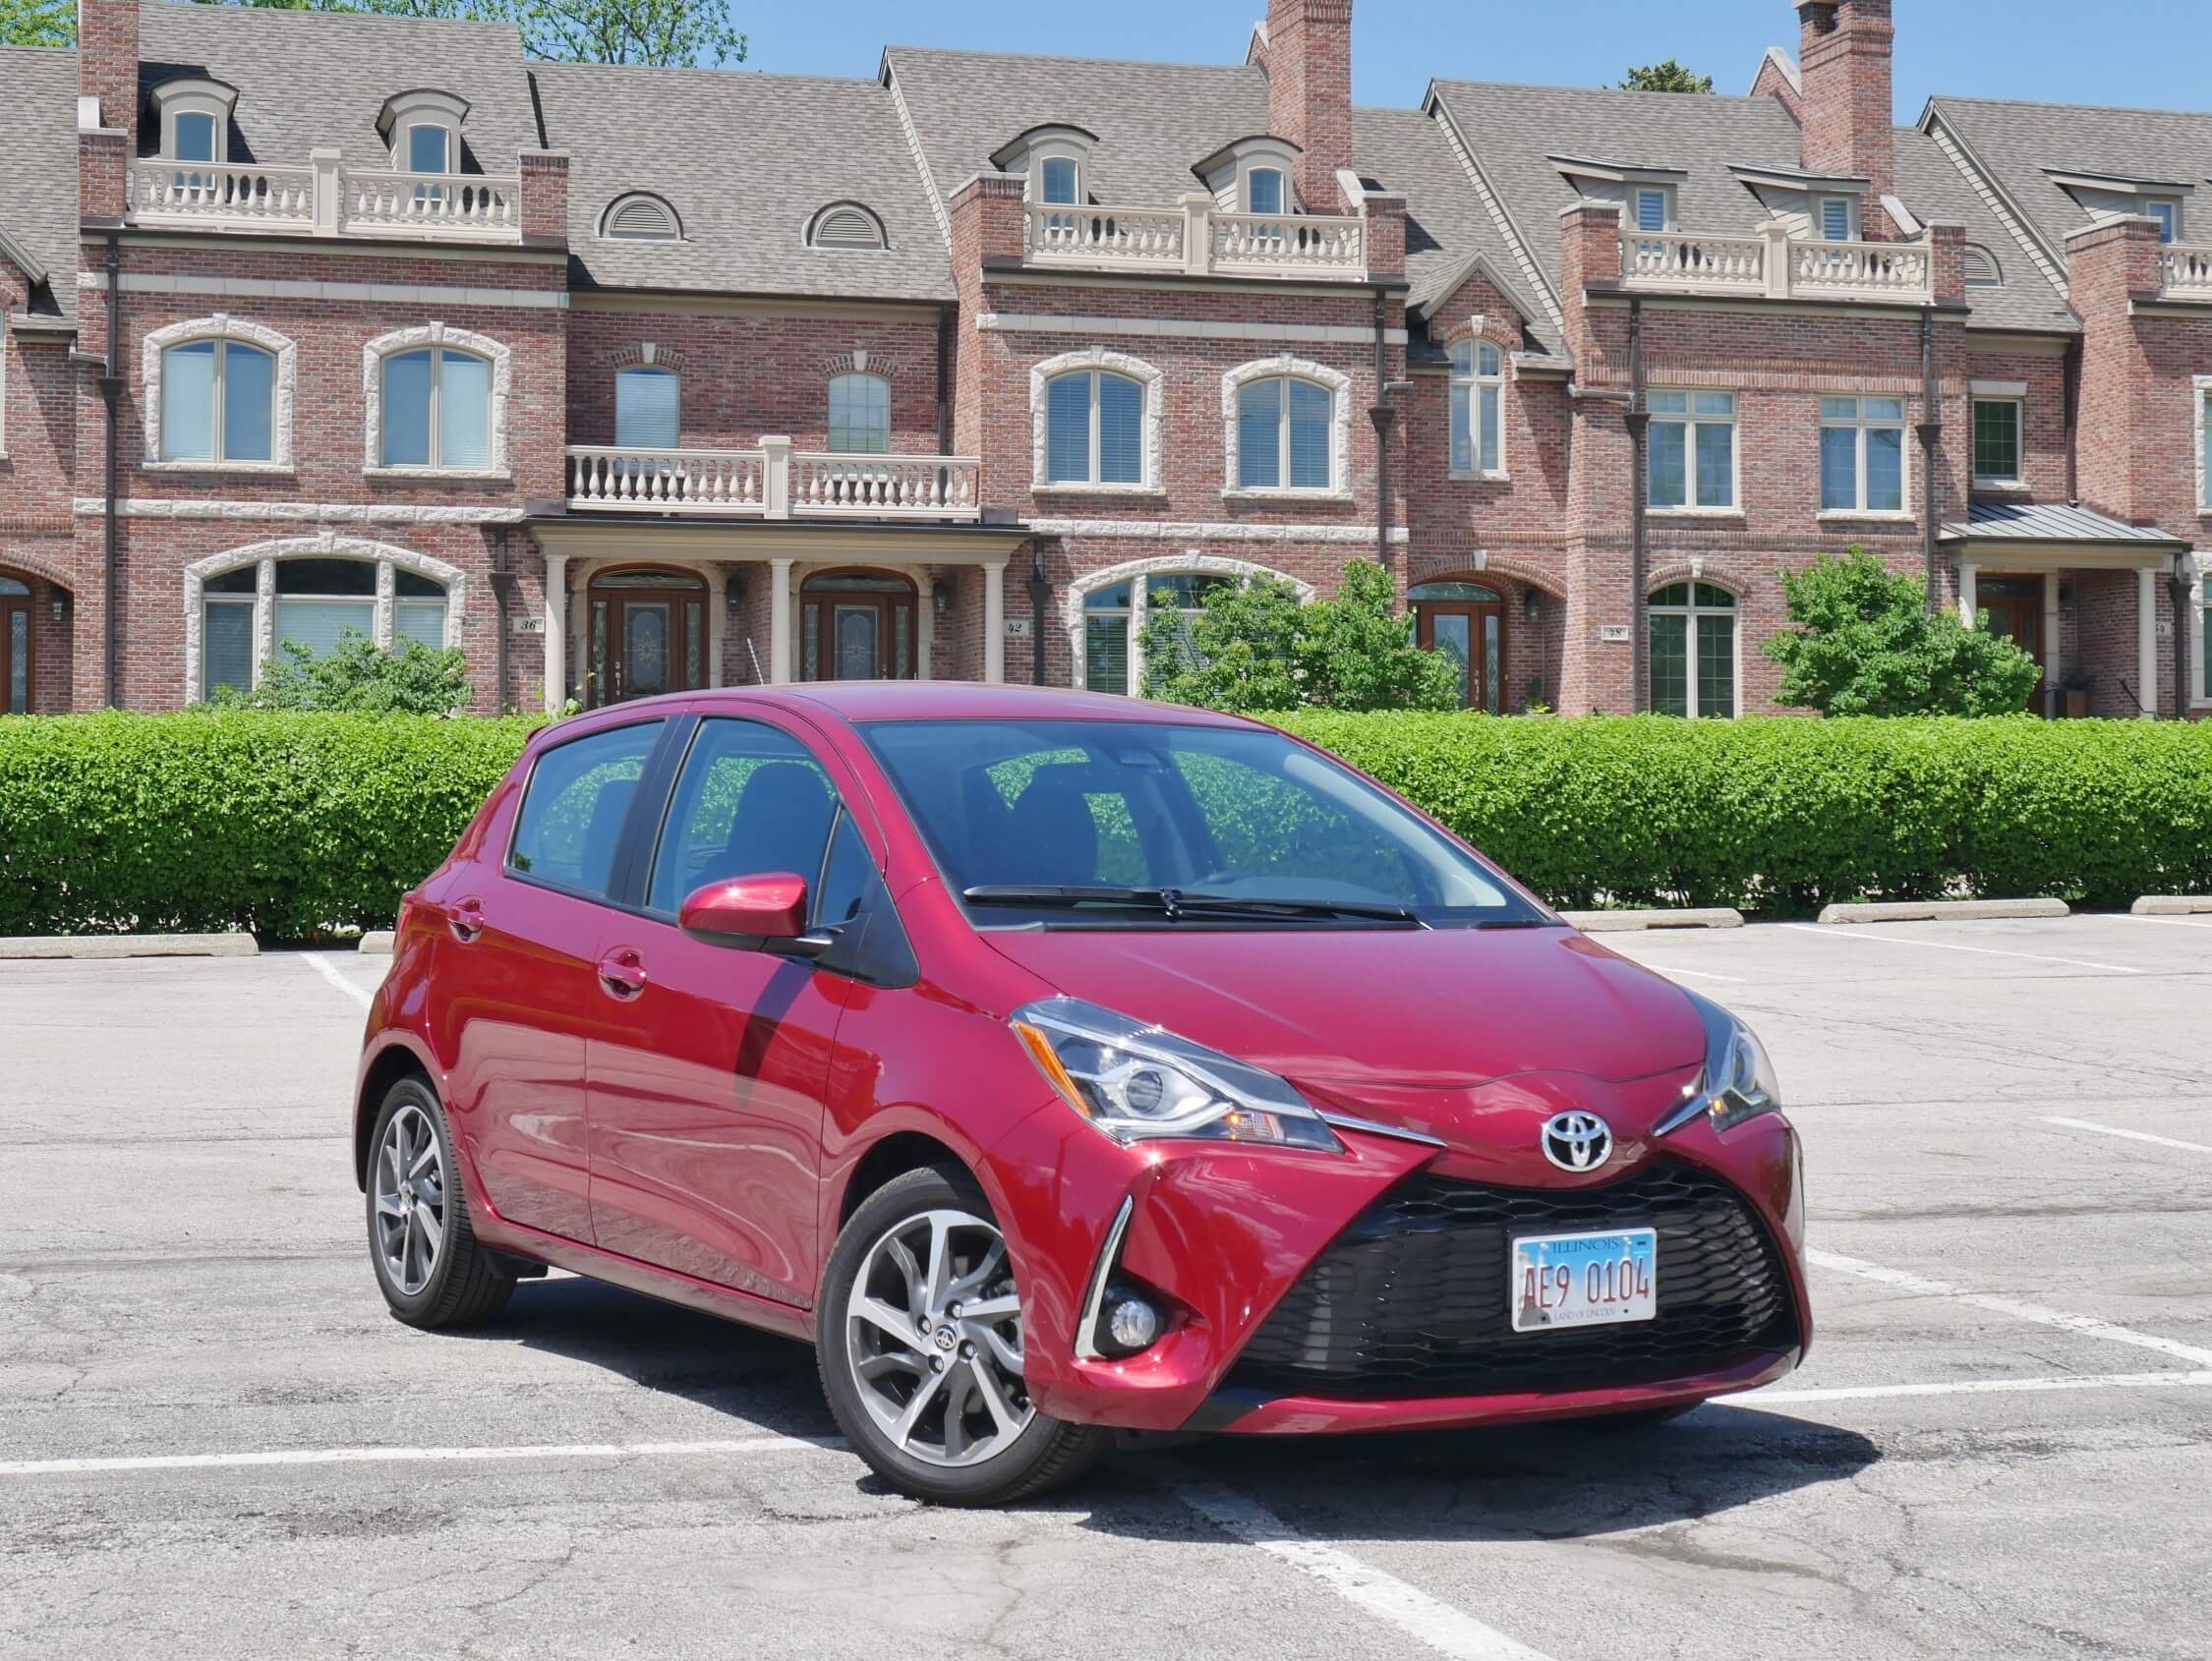  2018 Toyota Yaris 5 Door SE: This Point A to B subcompact hatchback ticket for admission to the reliable volume Japanese brand adds new exterior Prius-like details details. Pricing ranges from $16.8k to $20.5k for this SE tester.